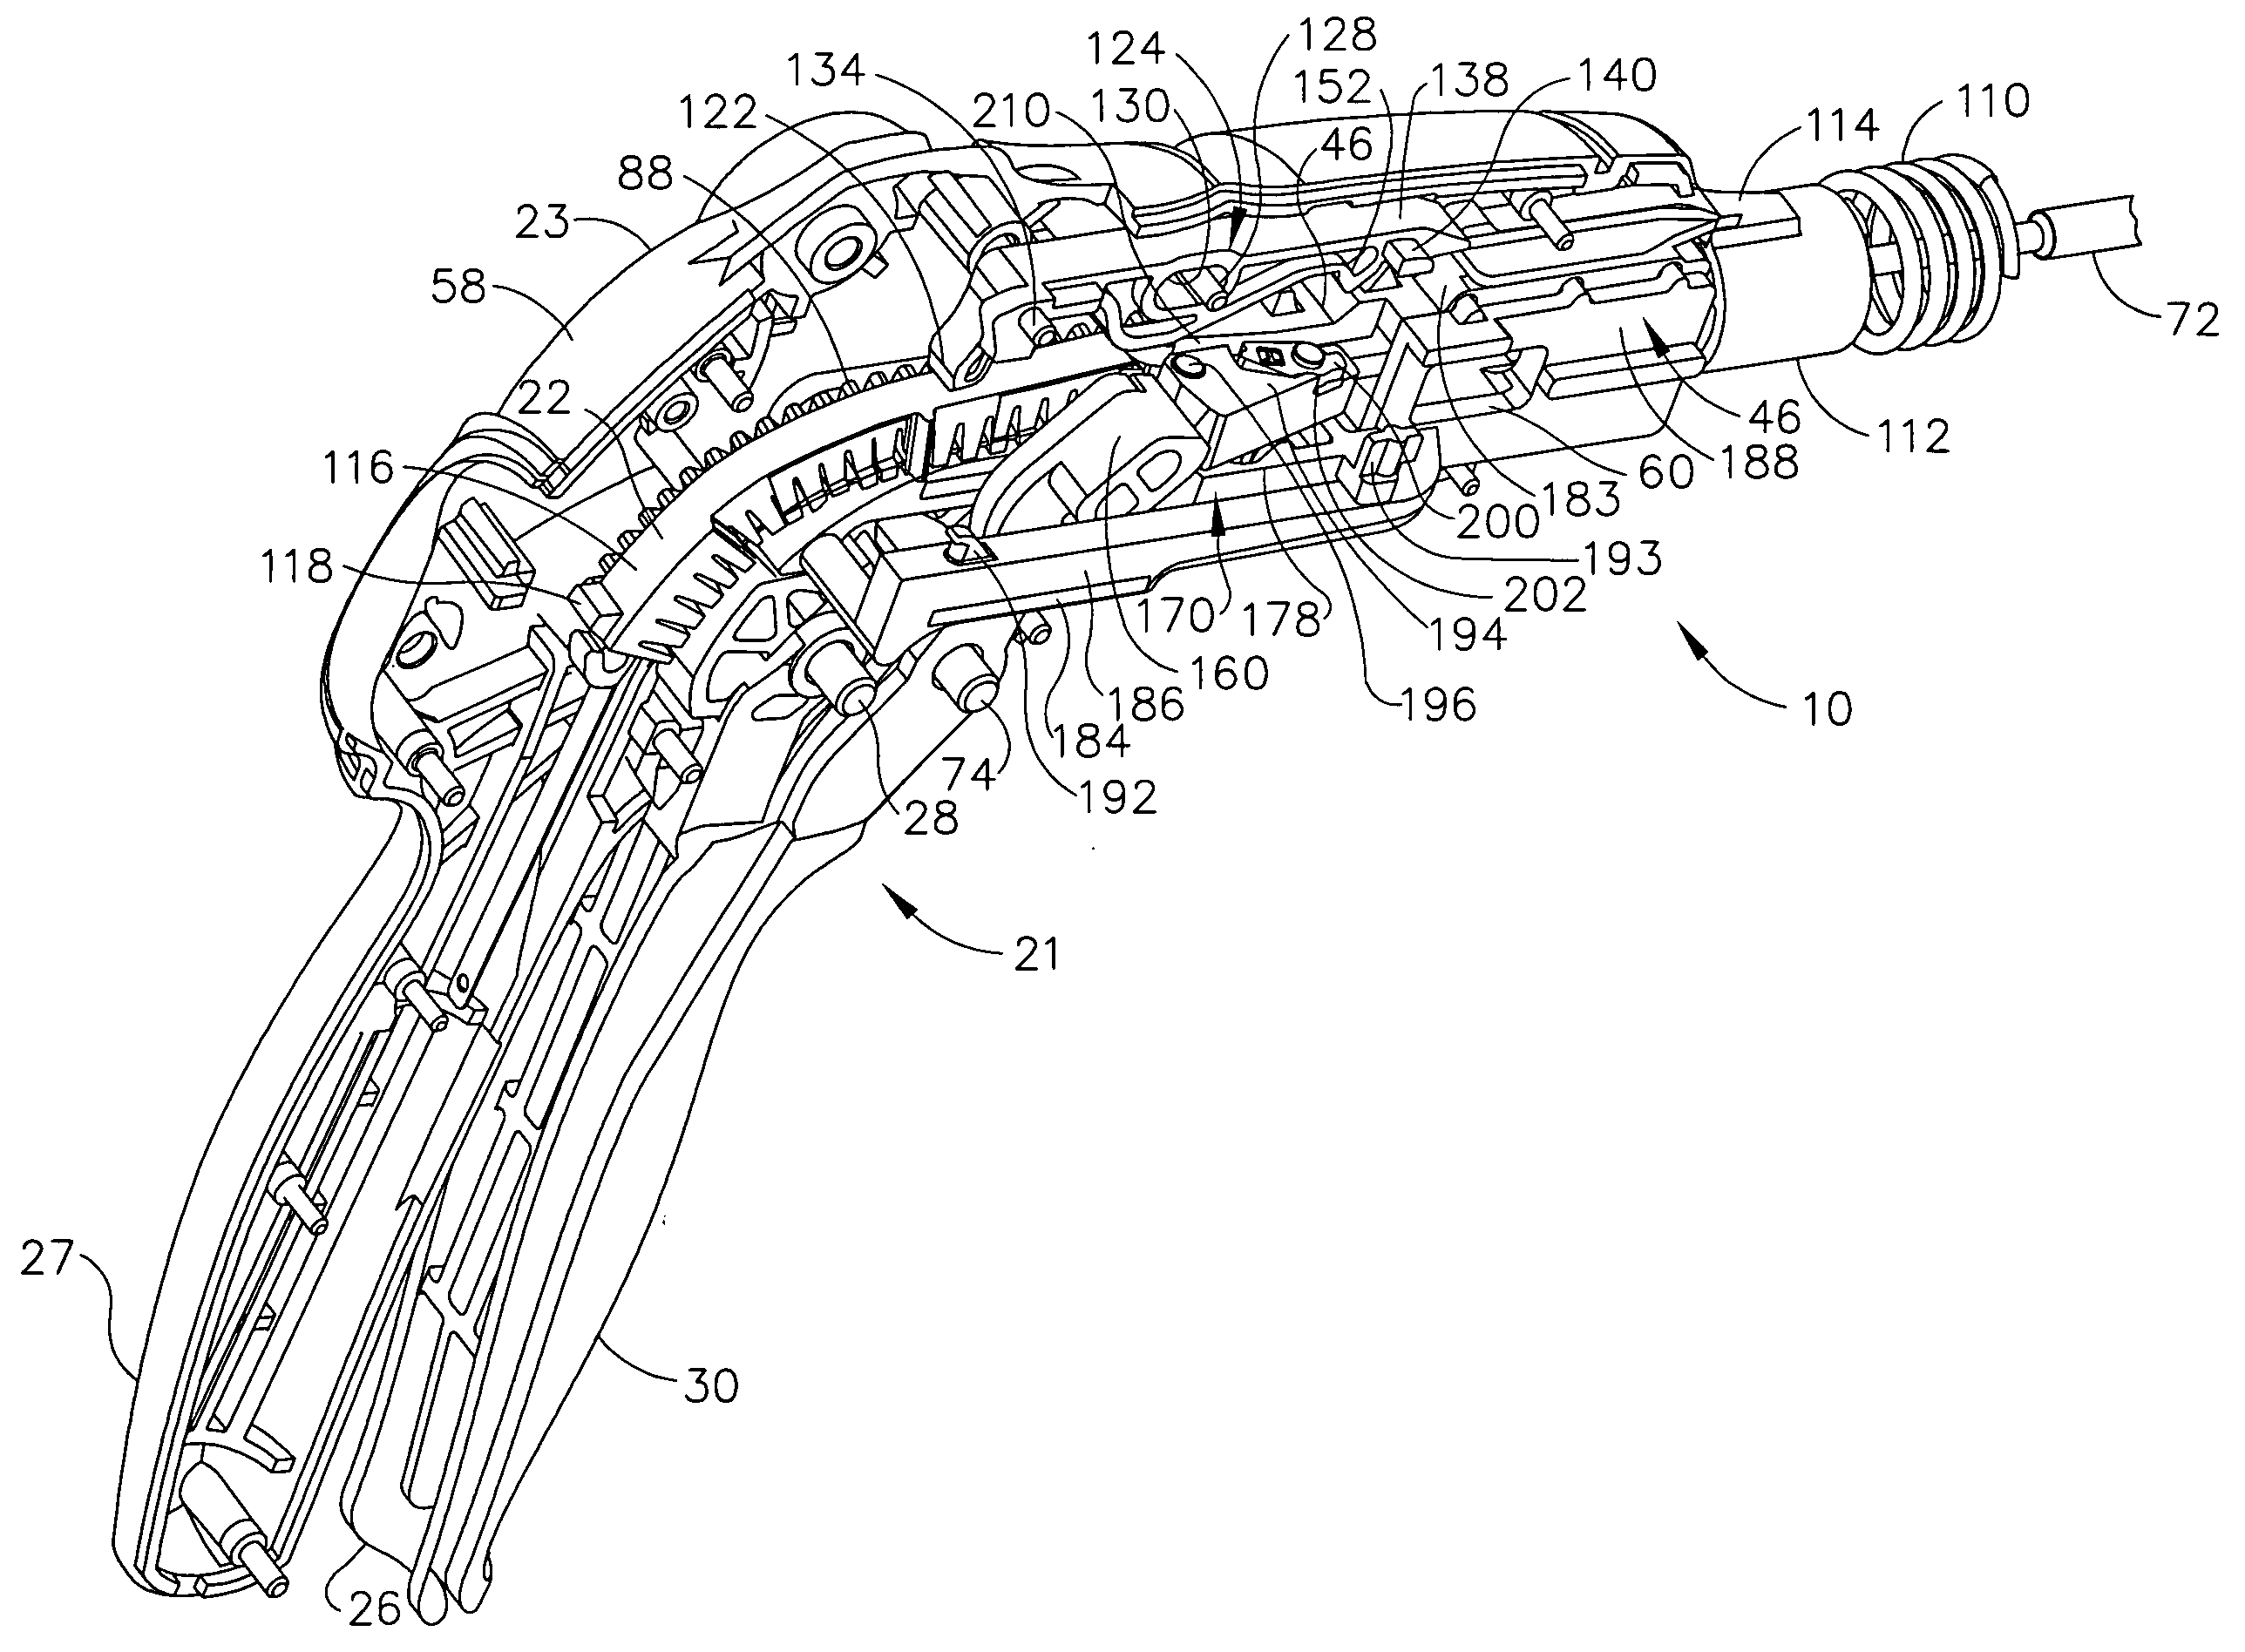 Surgical stapling instrument incorporating a multi-stroke firing mechanism with a flexible rack